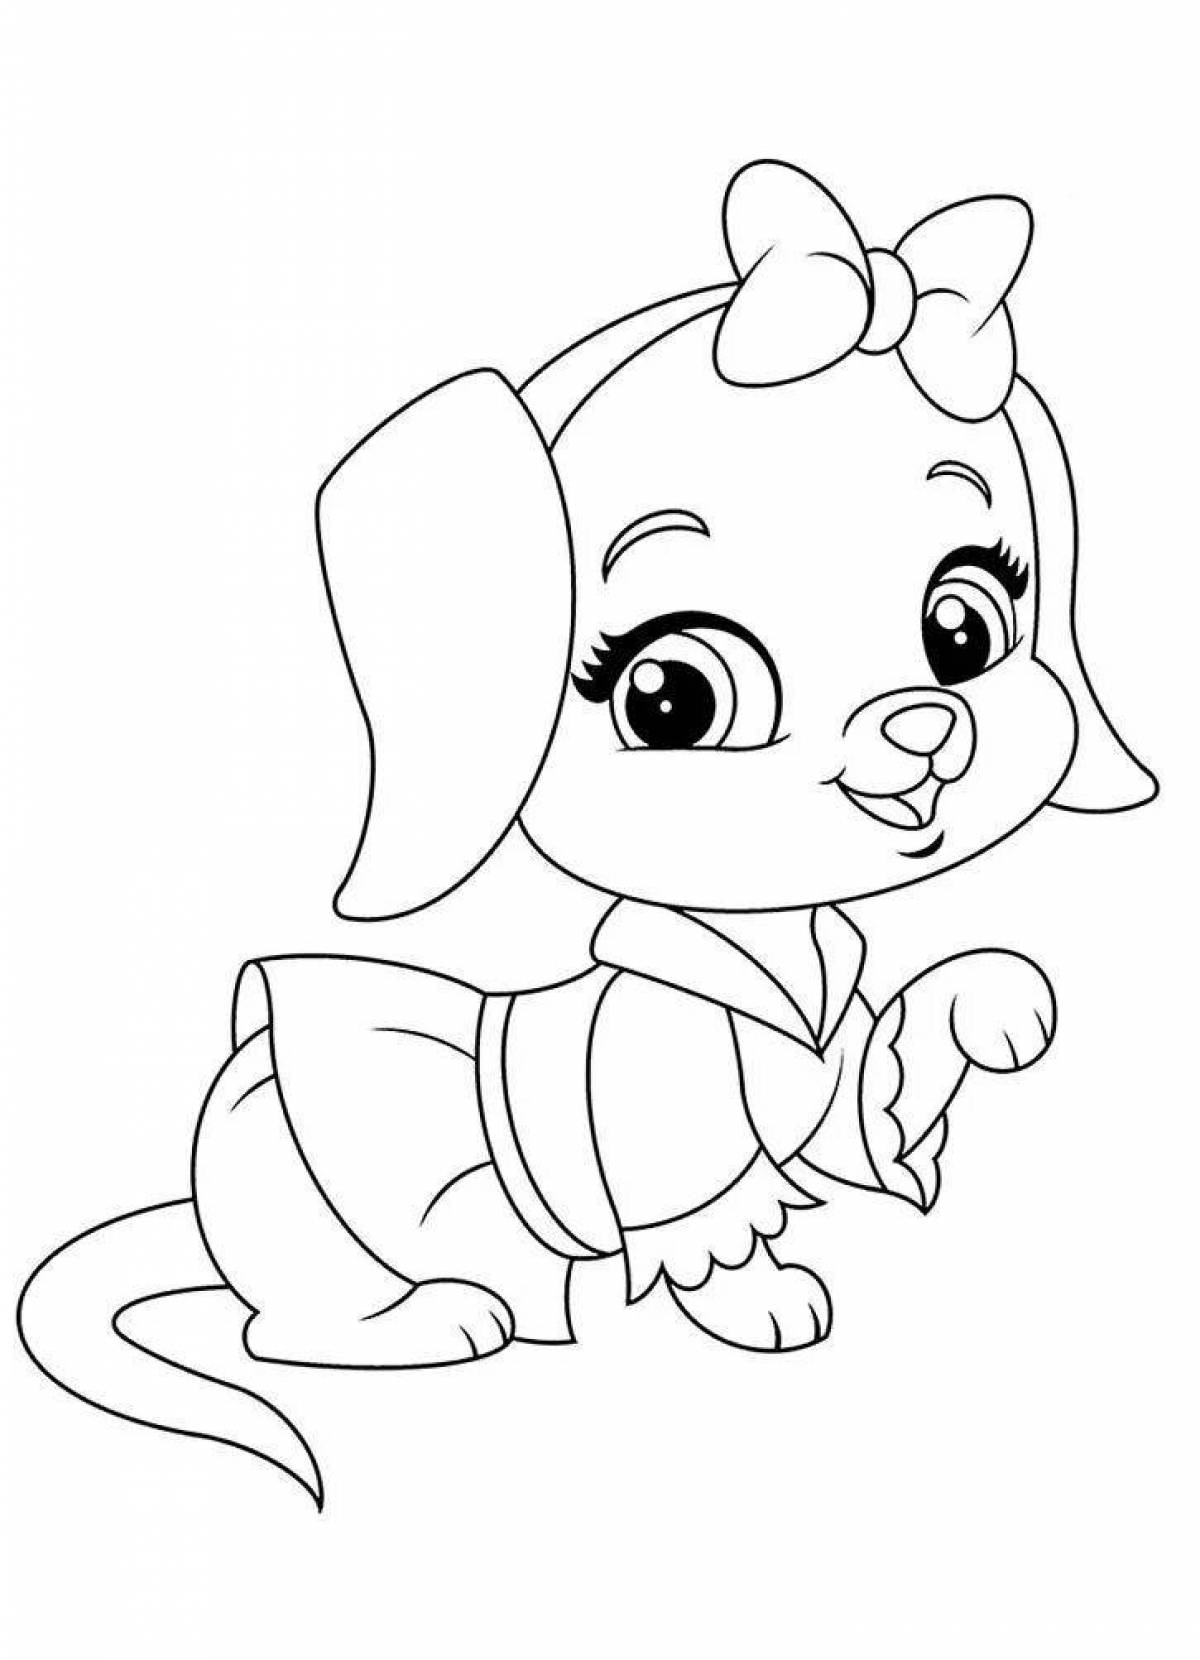 Wiggly furry friends coloring page